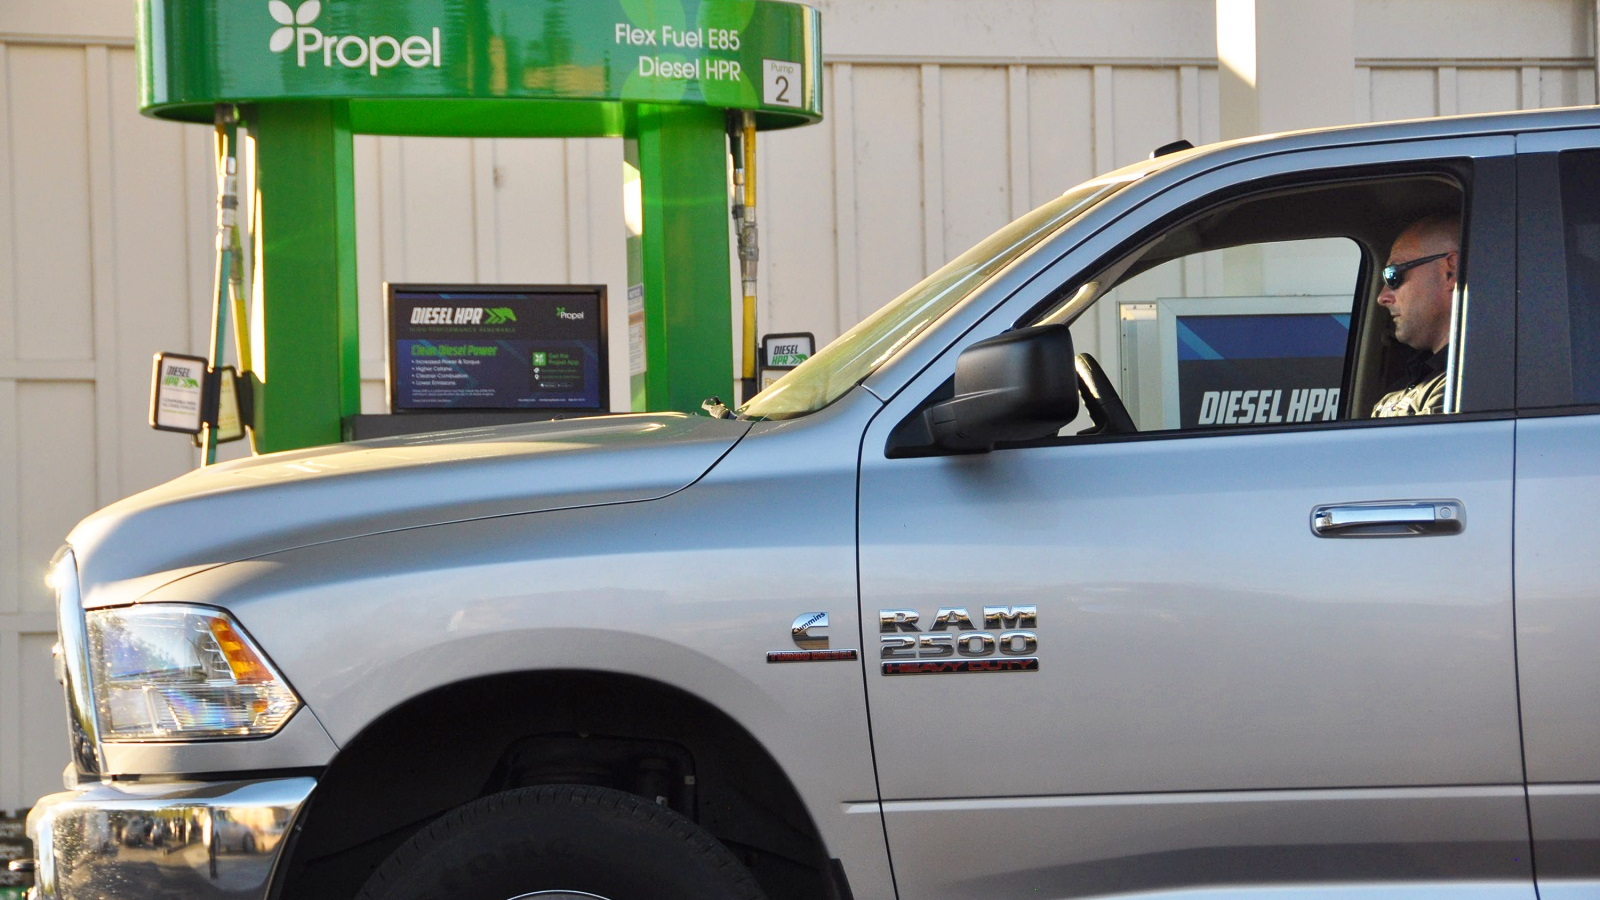 Propel Fuels rolls out High Performance Renewable Diesel fuel in 18 Northern California locations